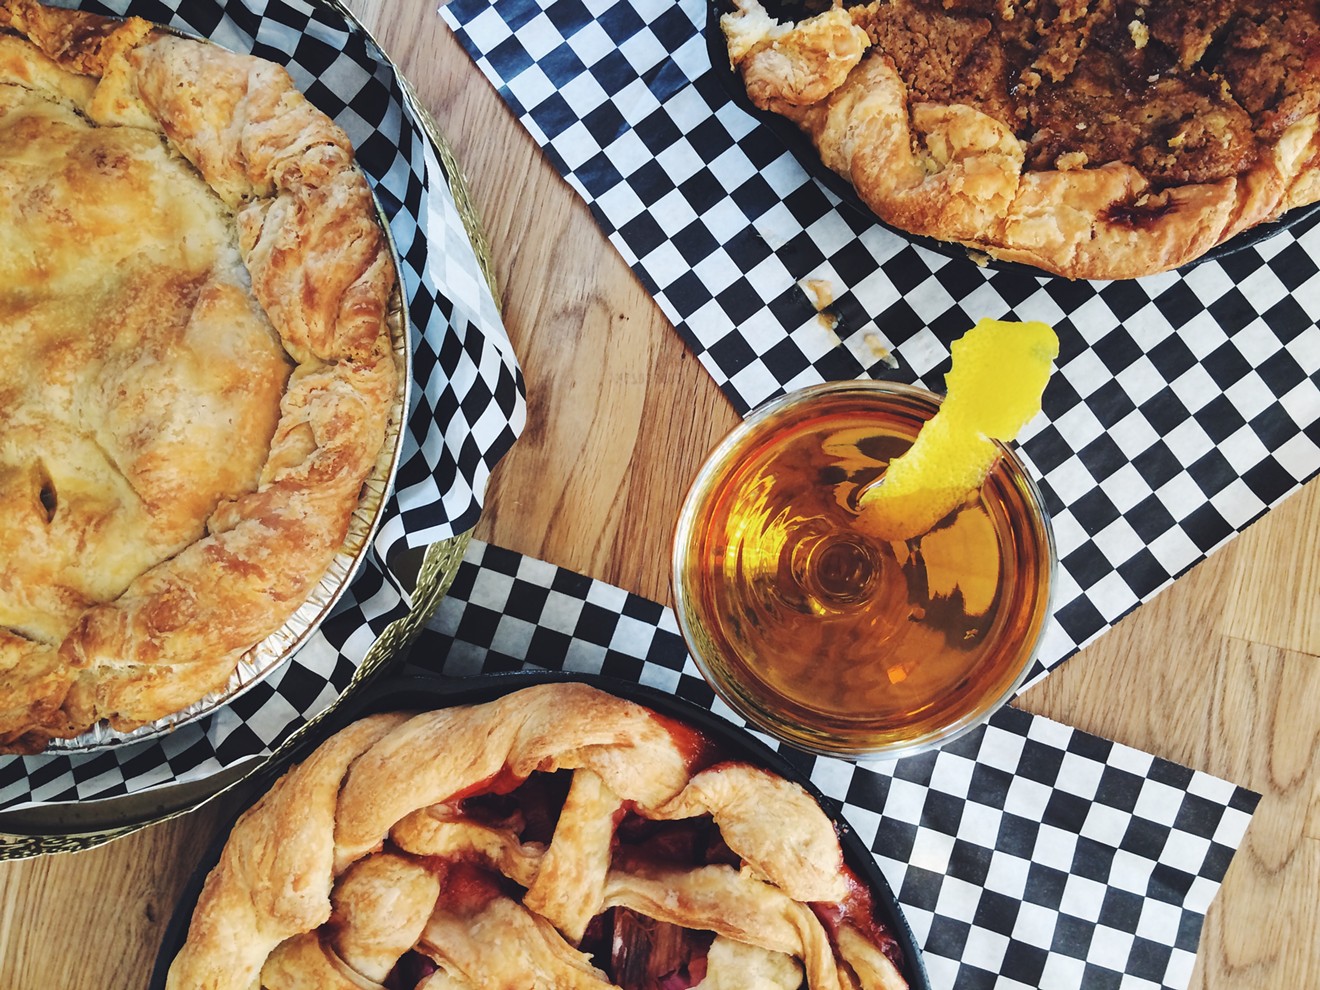 Shauna Lott Harman's Long I Pie turns out some delicious fall choices.